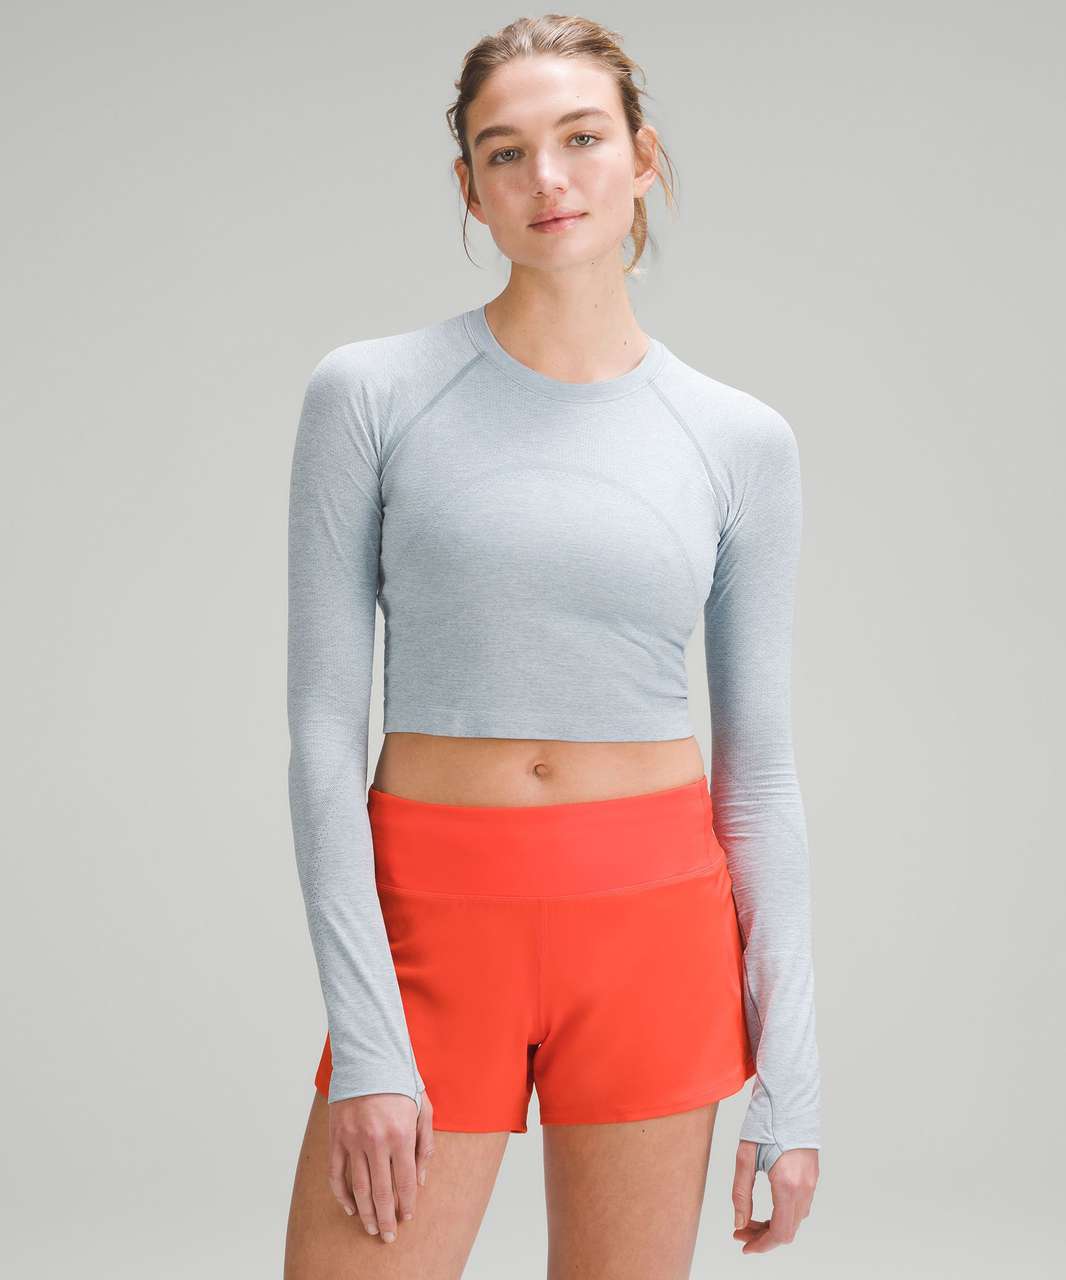 Swiftly Tech Cropped Long Sleeved Shirt 2.0 in Chambray / Powder Blue (6)  and Black (4). : r/lululemon